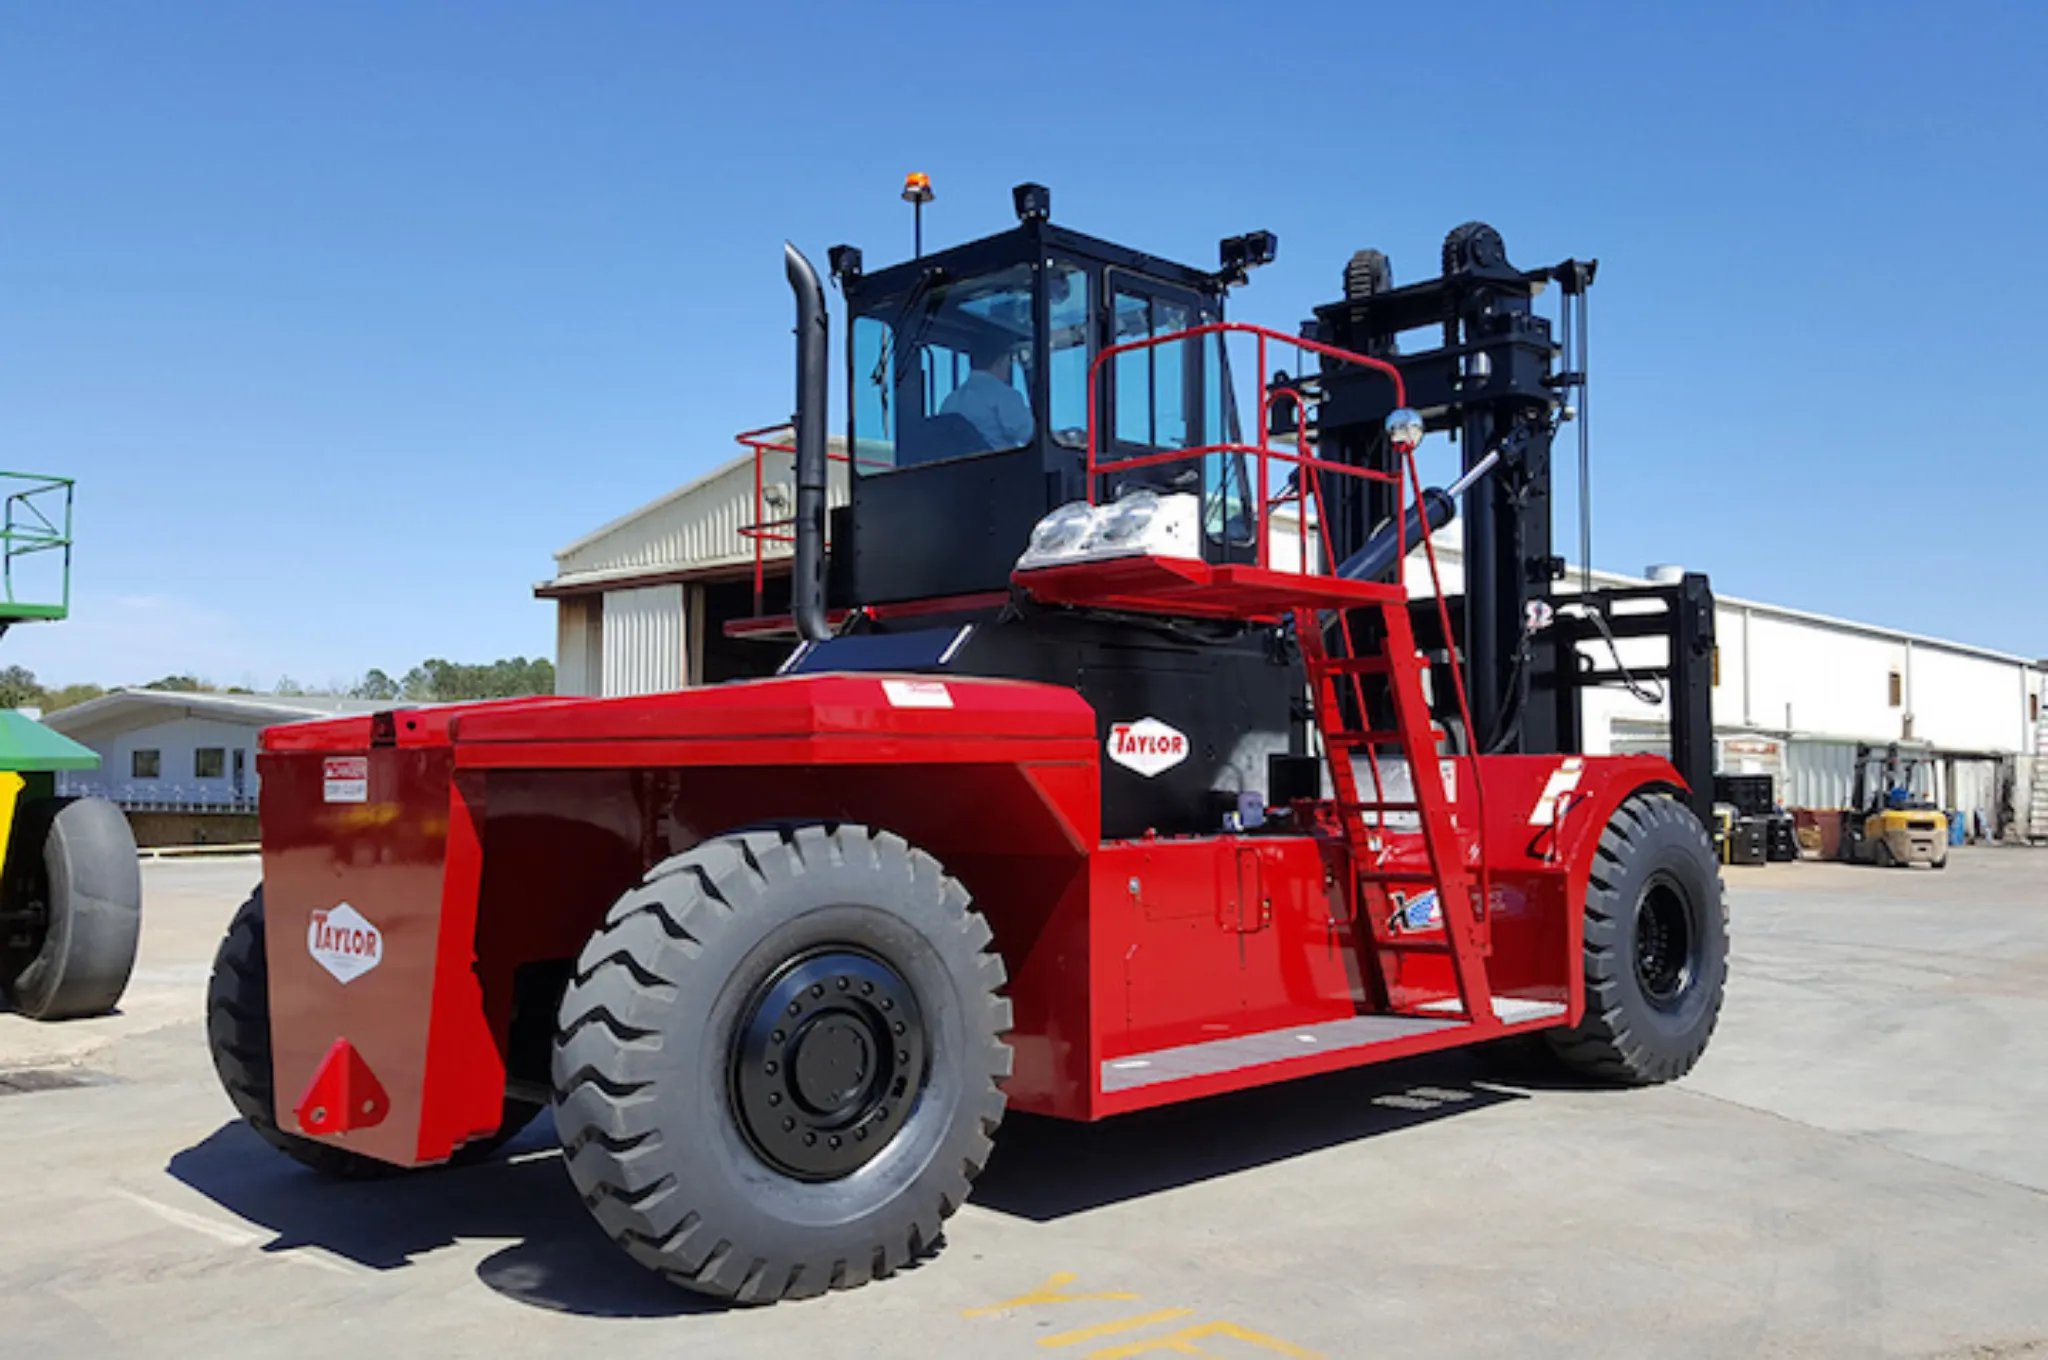 Taylor X-900M High Capacity Forklift